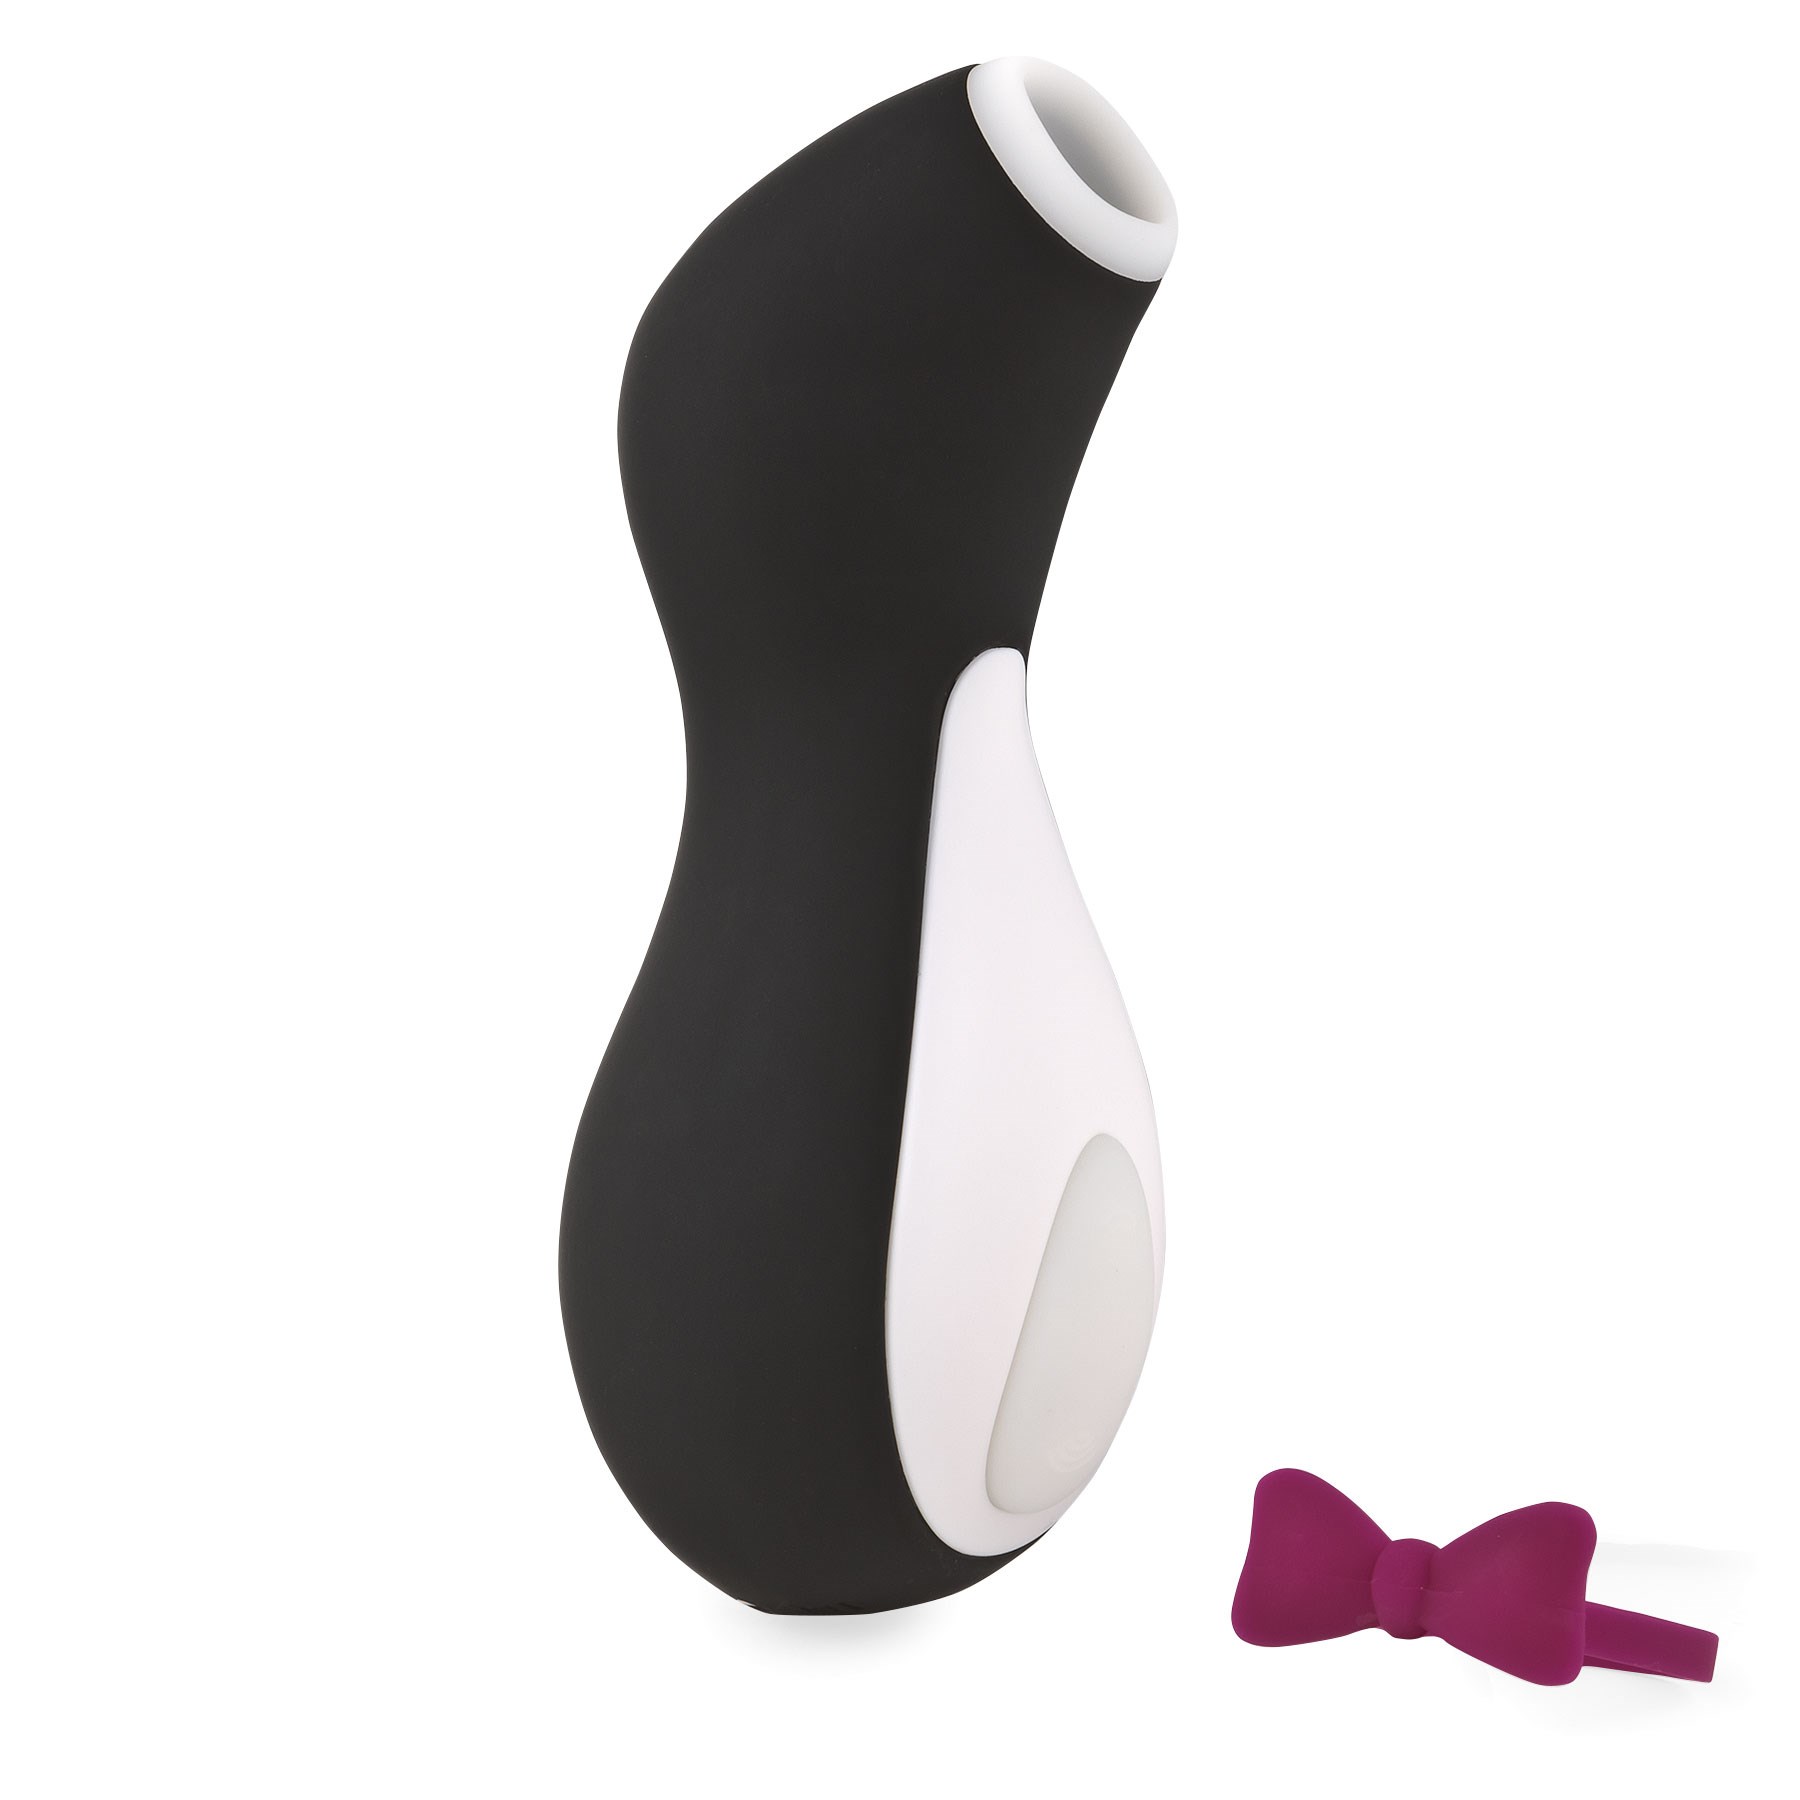 Satisfyer Pro Penguin Next Generation with bow tie off